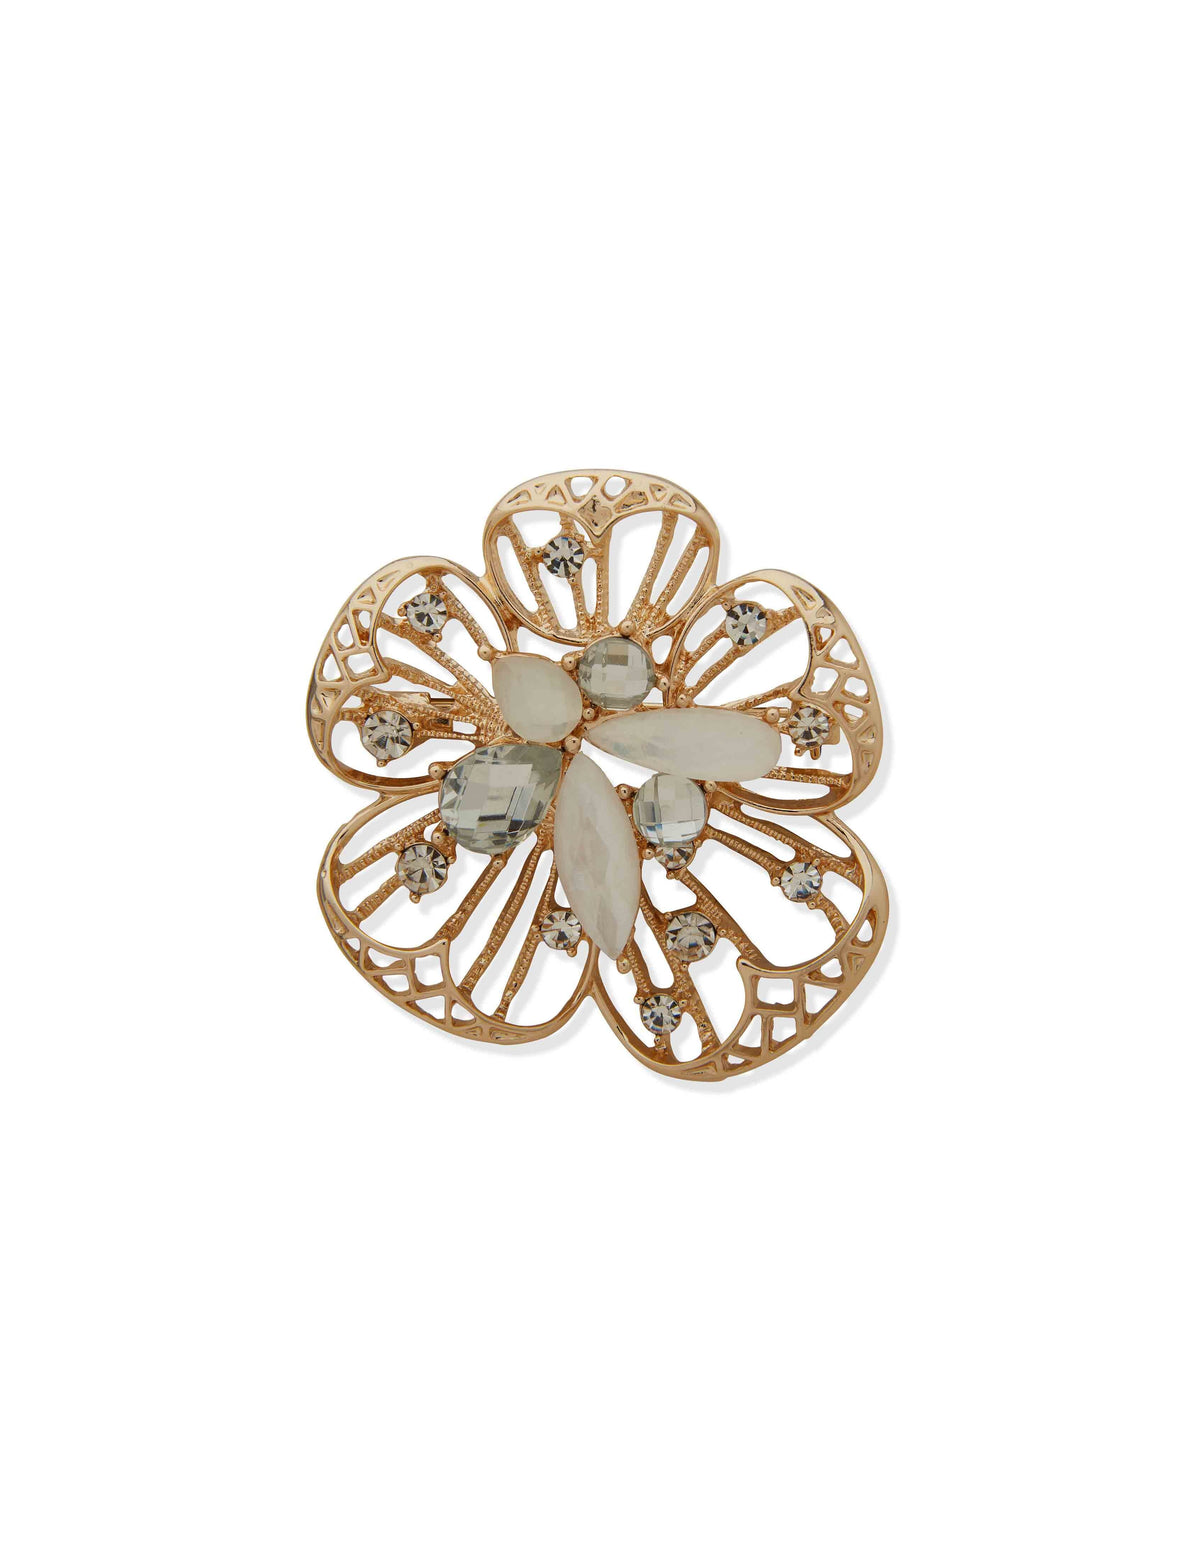 Anne Klein Gold Tone Crystal Cluster Flower Pin